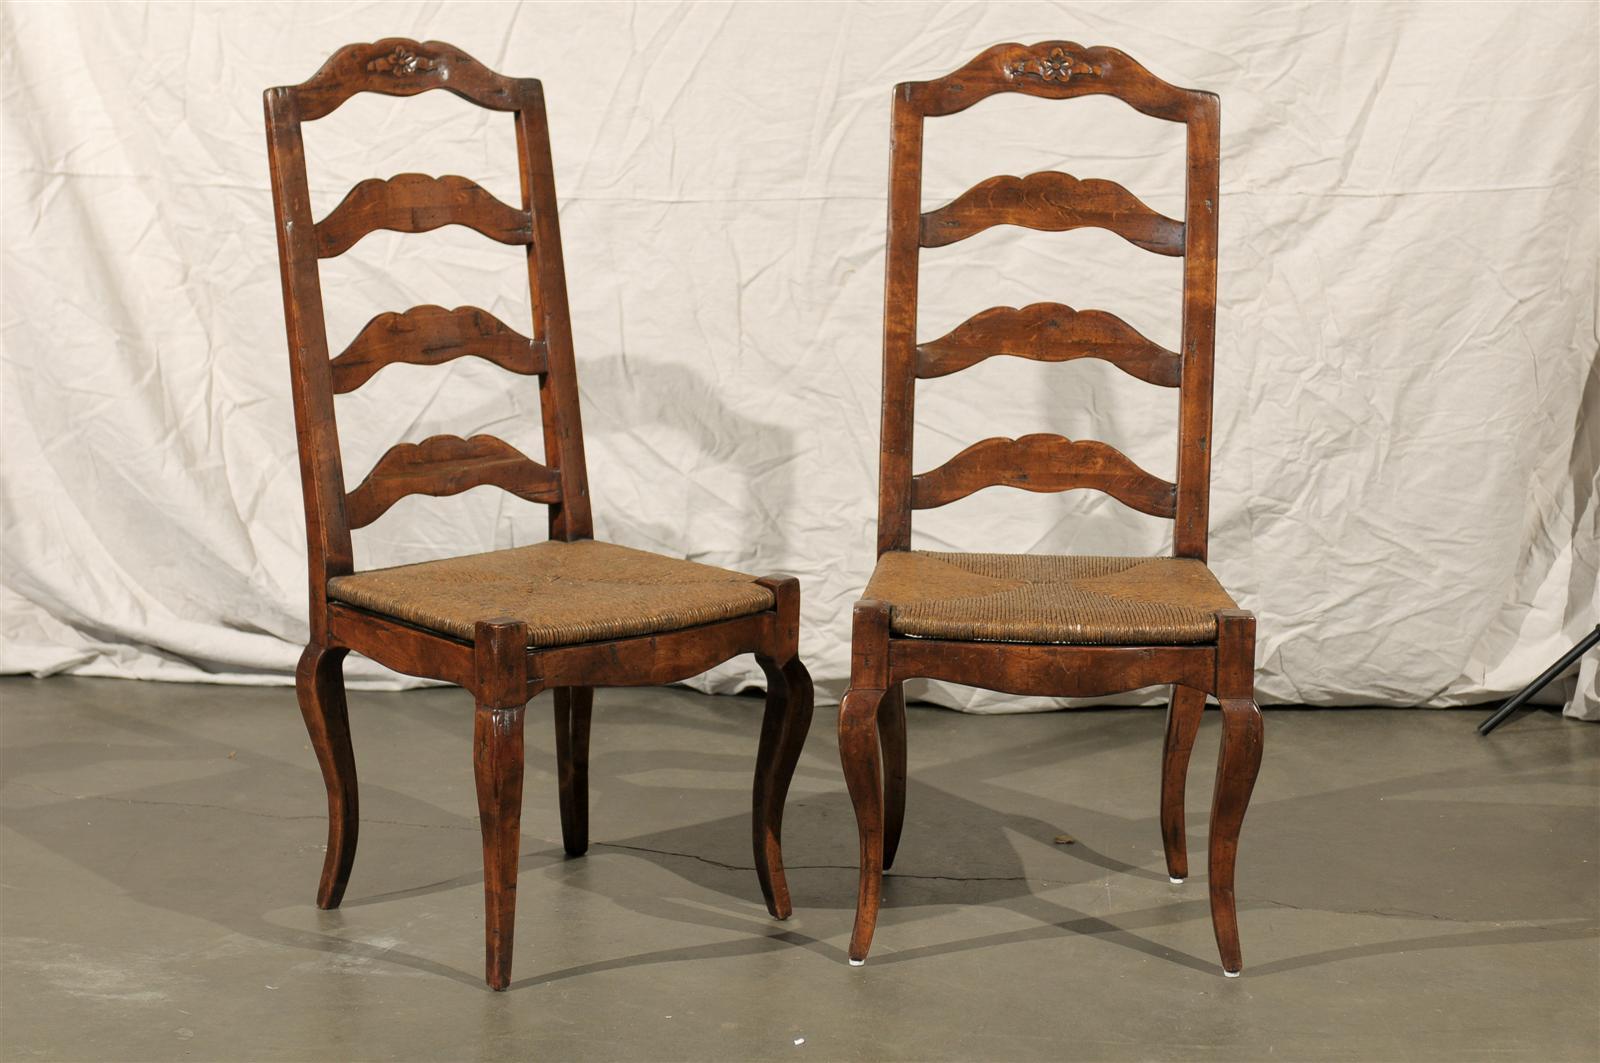 Set of four early 20th century French Provincial ladder back rush seat chairs.